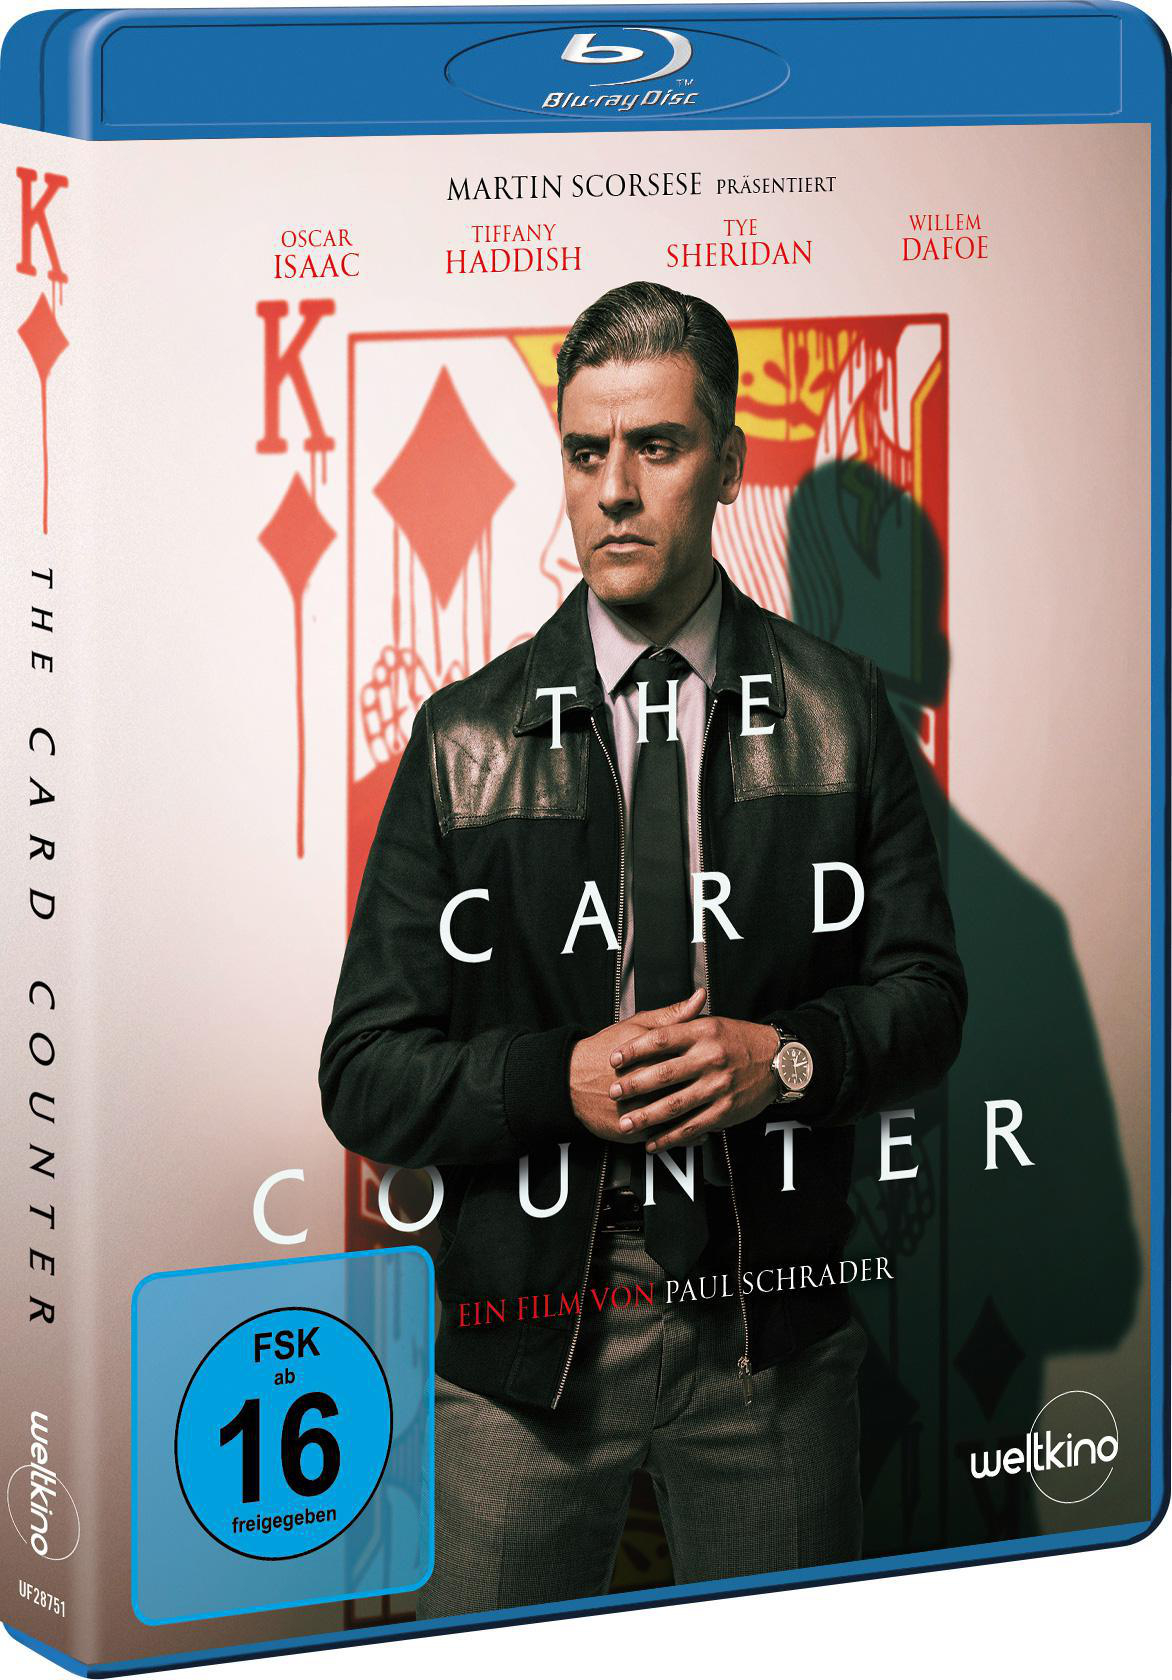 Card Counter The Blu-ray